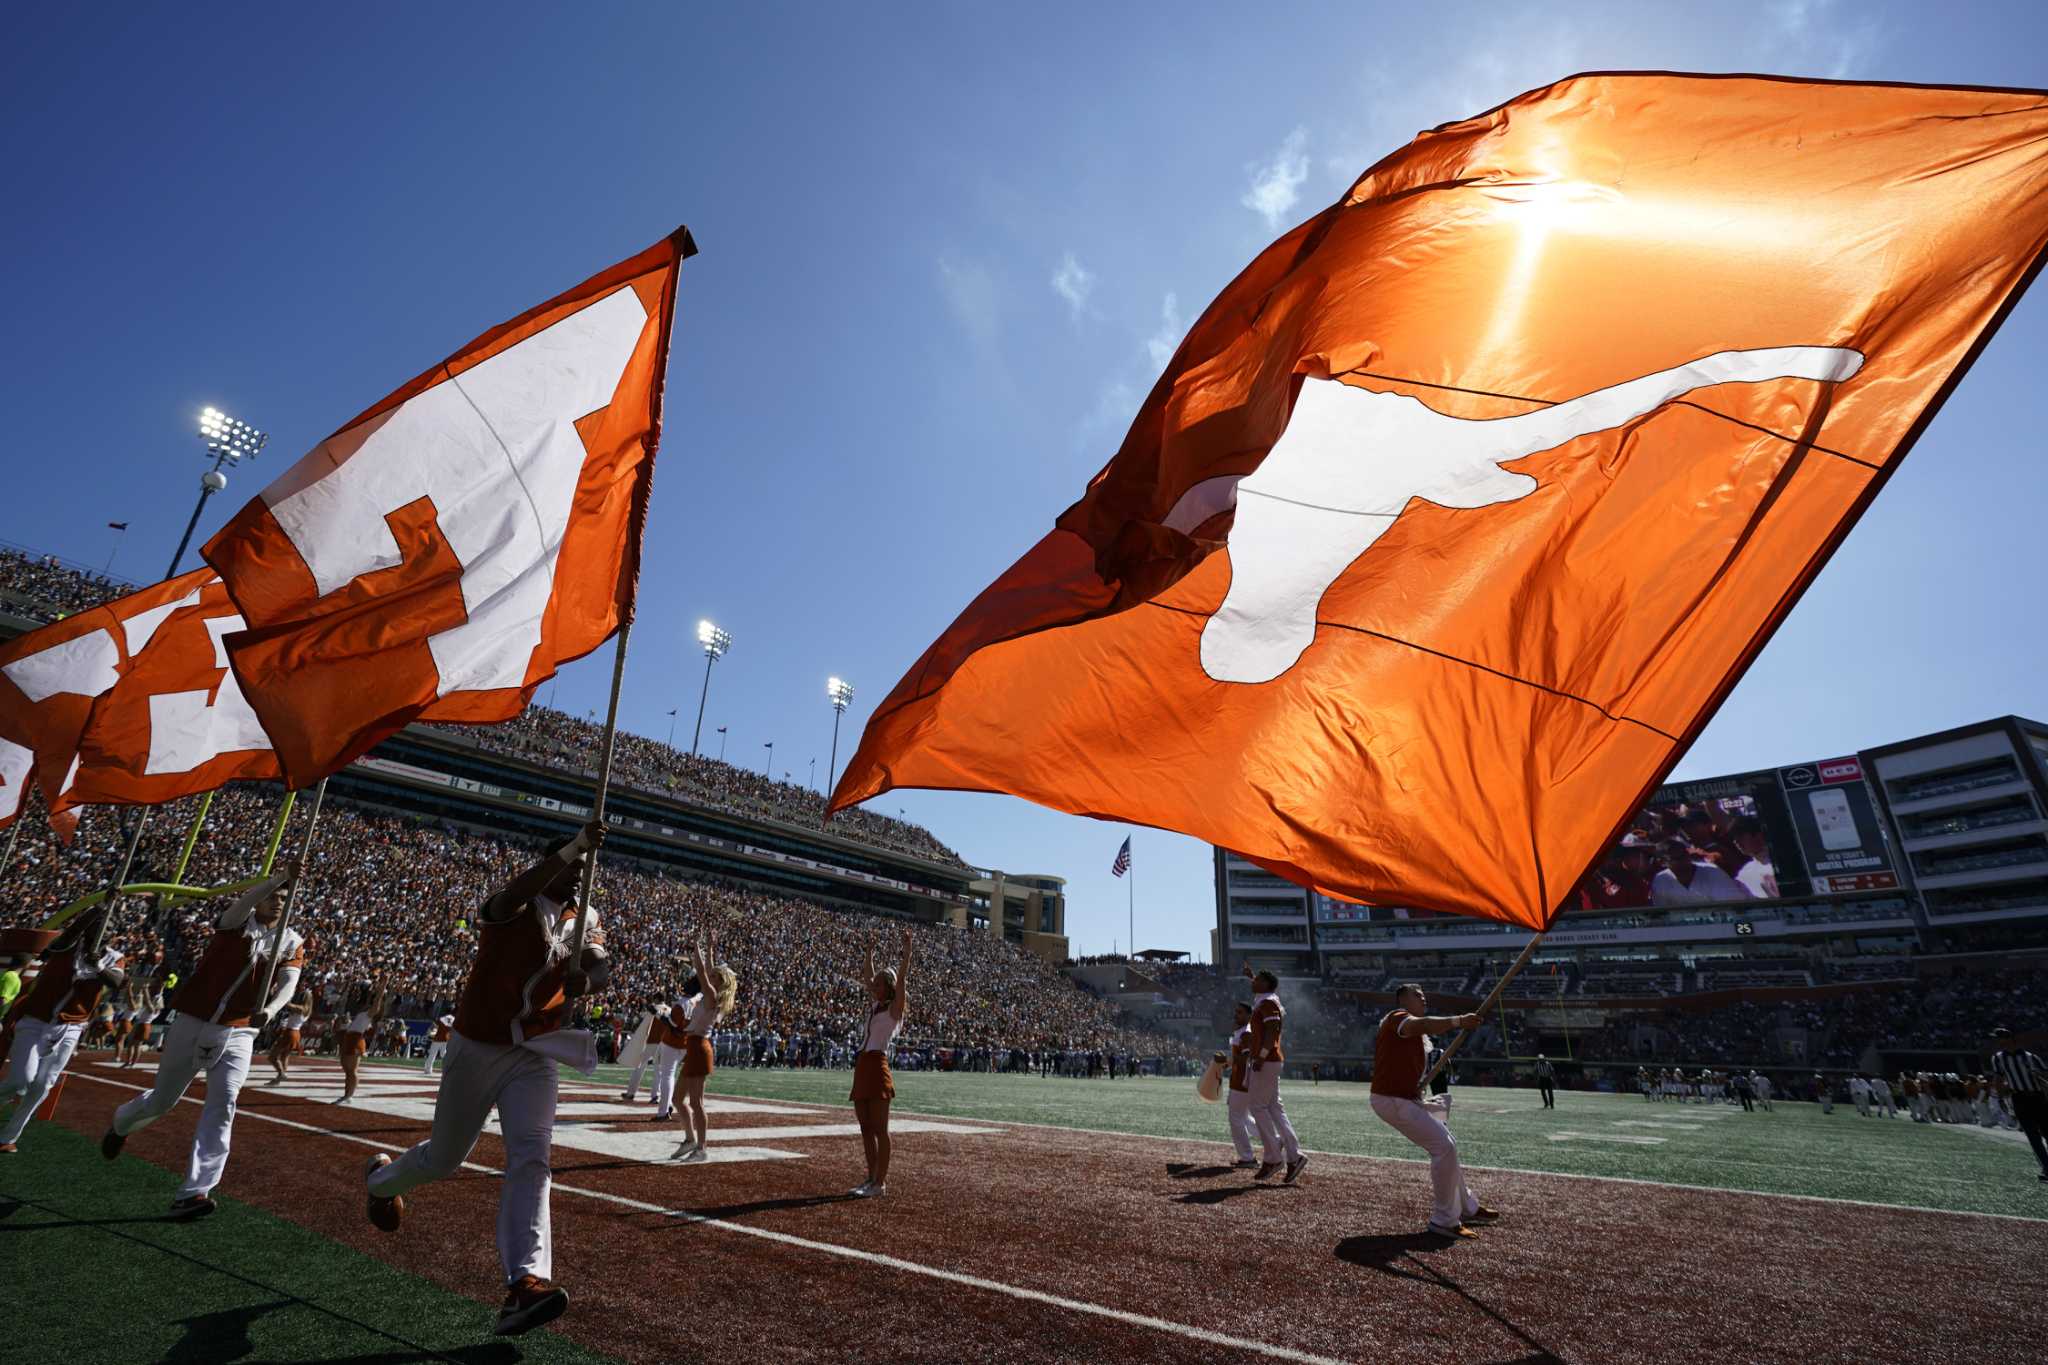 Texas remains at No. 7 in the third College Football Playoff